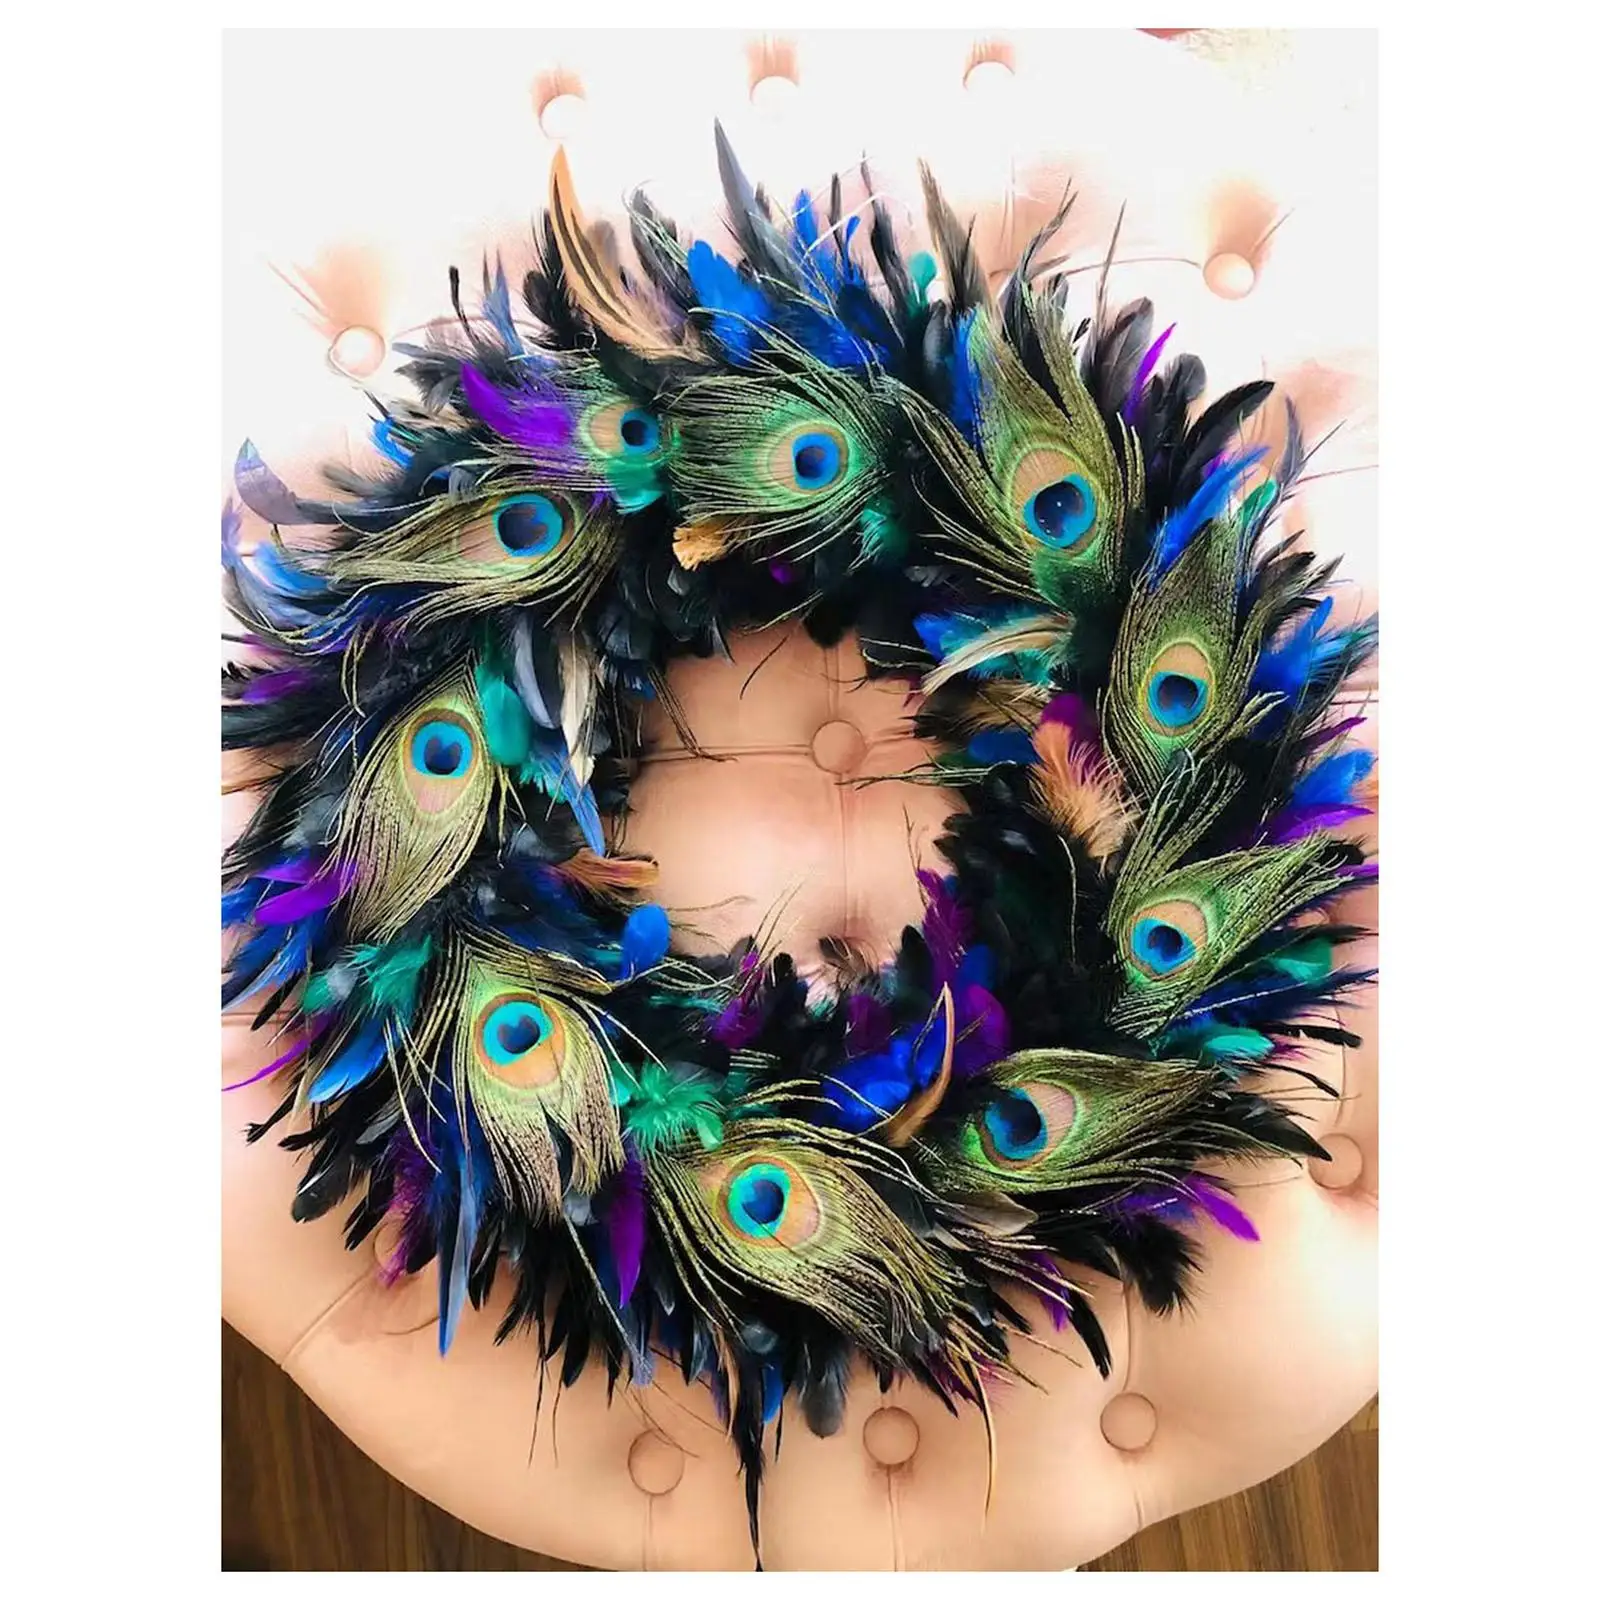 Simulated Feather Garland Indoor Outdoor Artificial Peacock Feathers Wreath